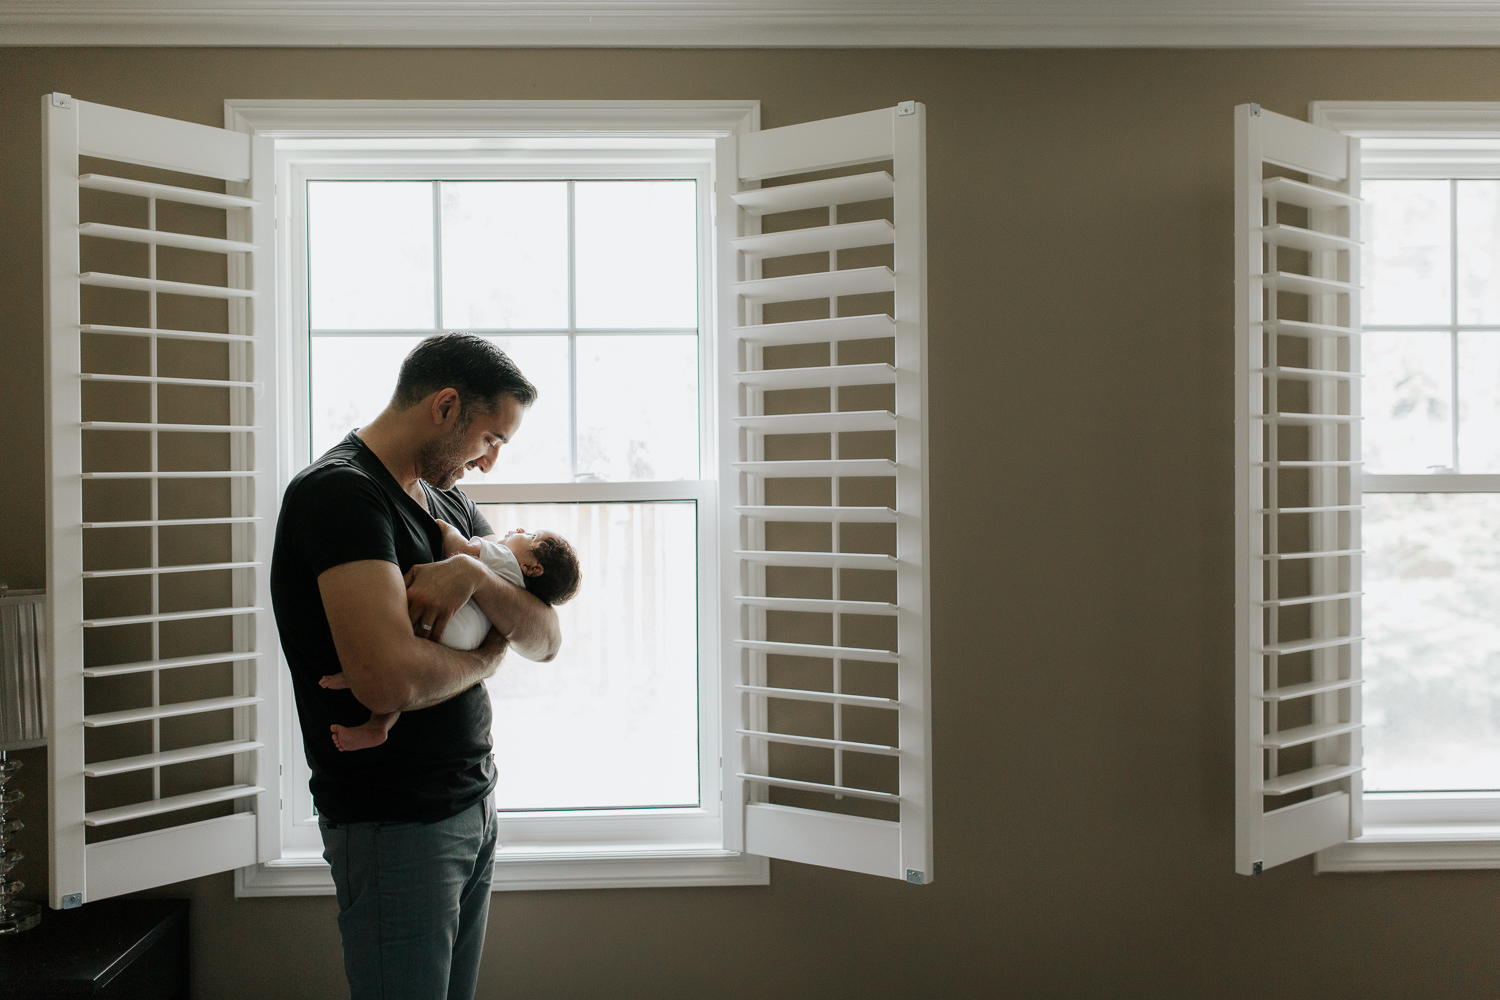 new father standing in front of window holding and smiling at 1 month old baby boy sleeping in his arms - GTA In-Home Photography